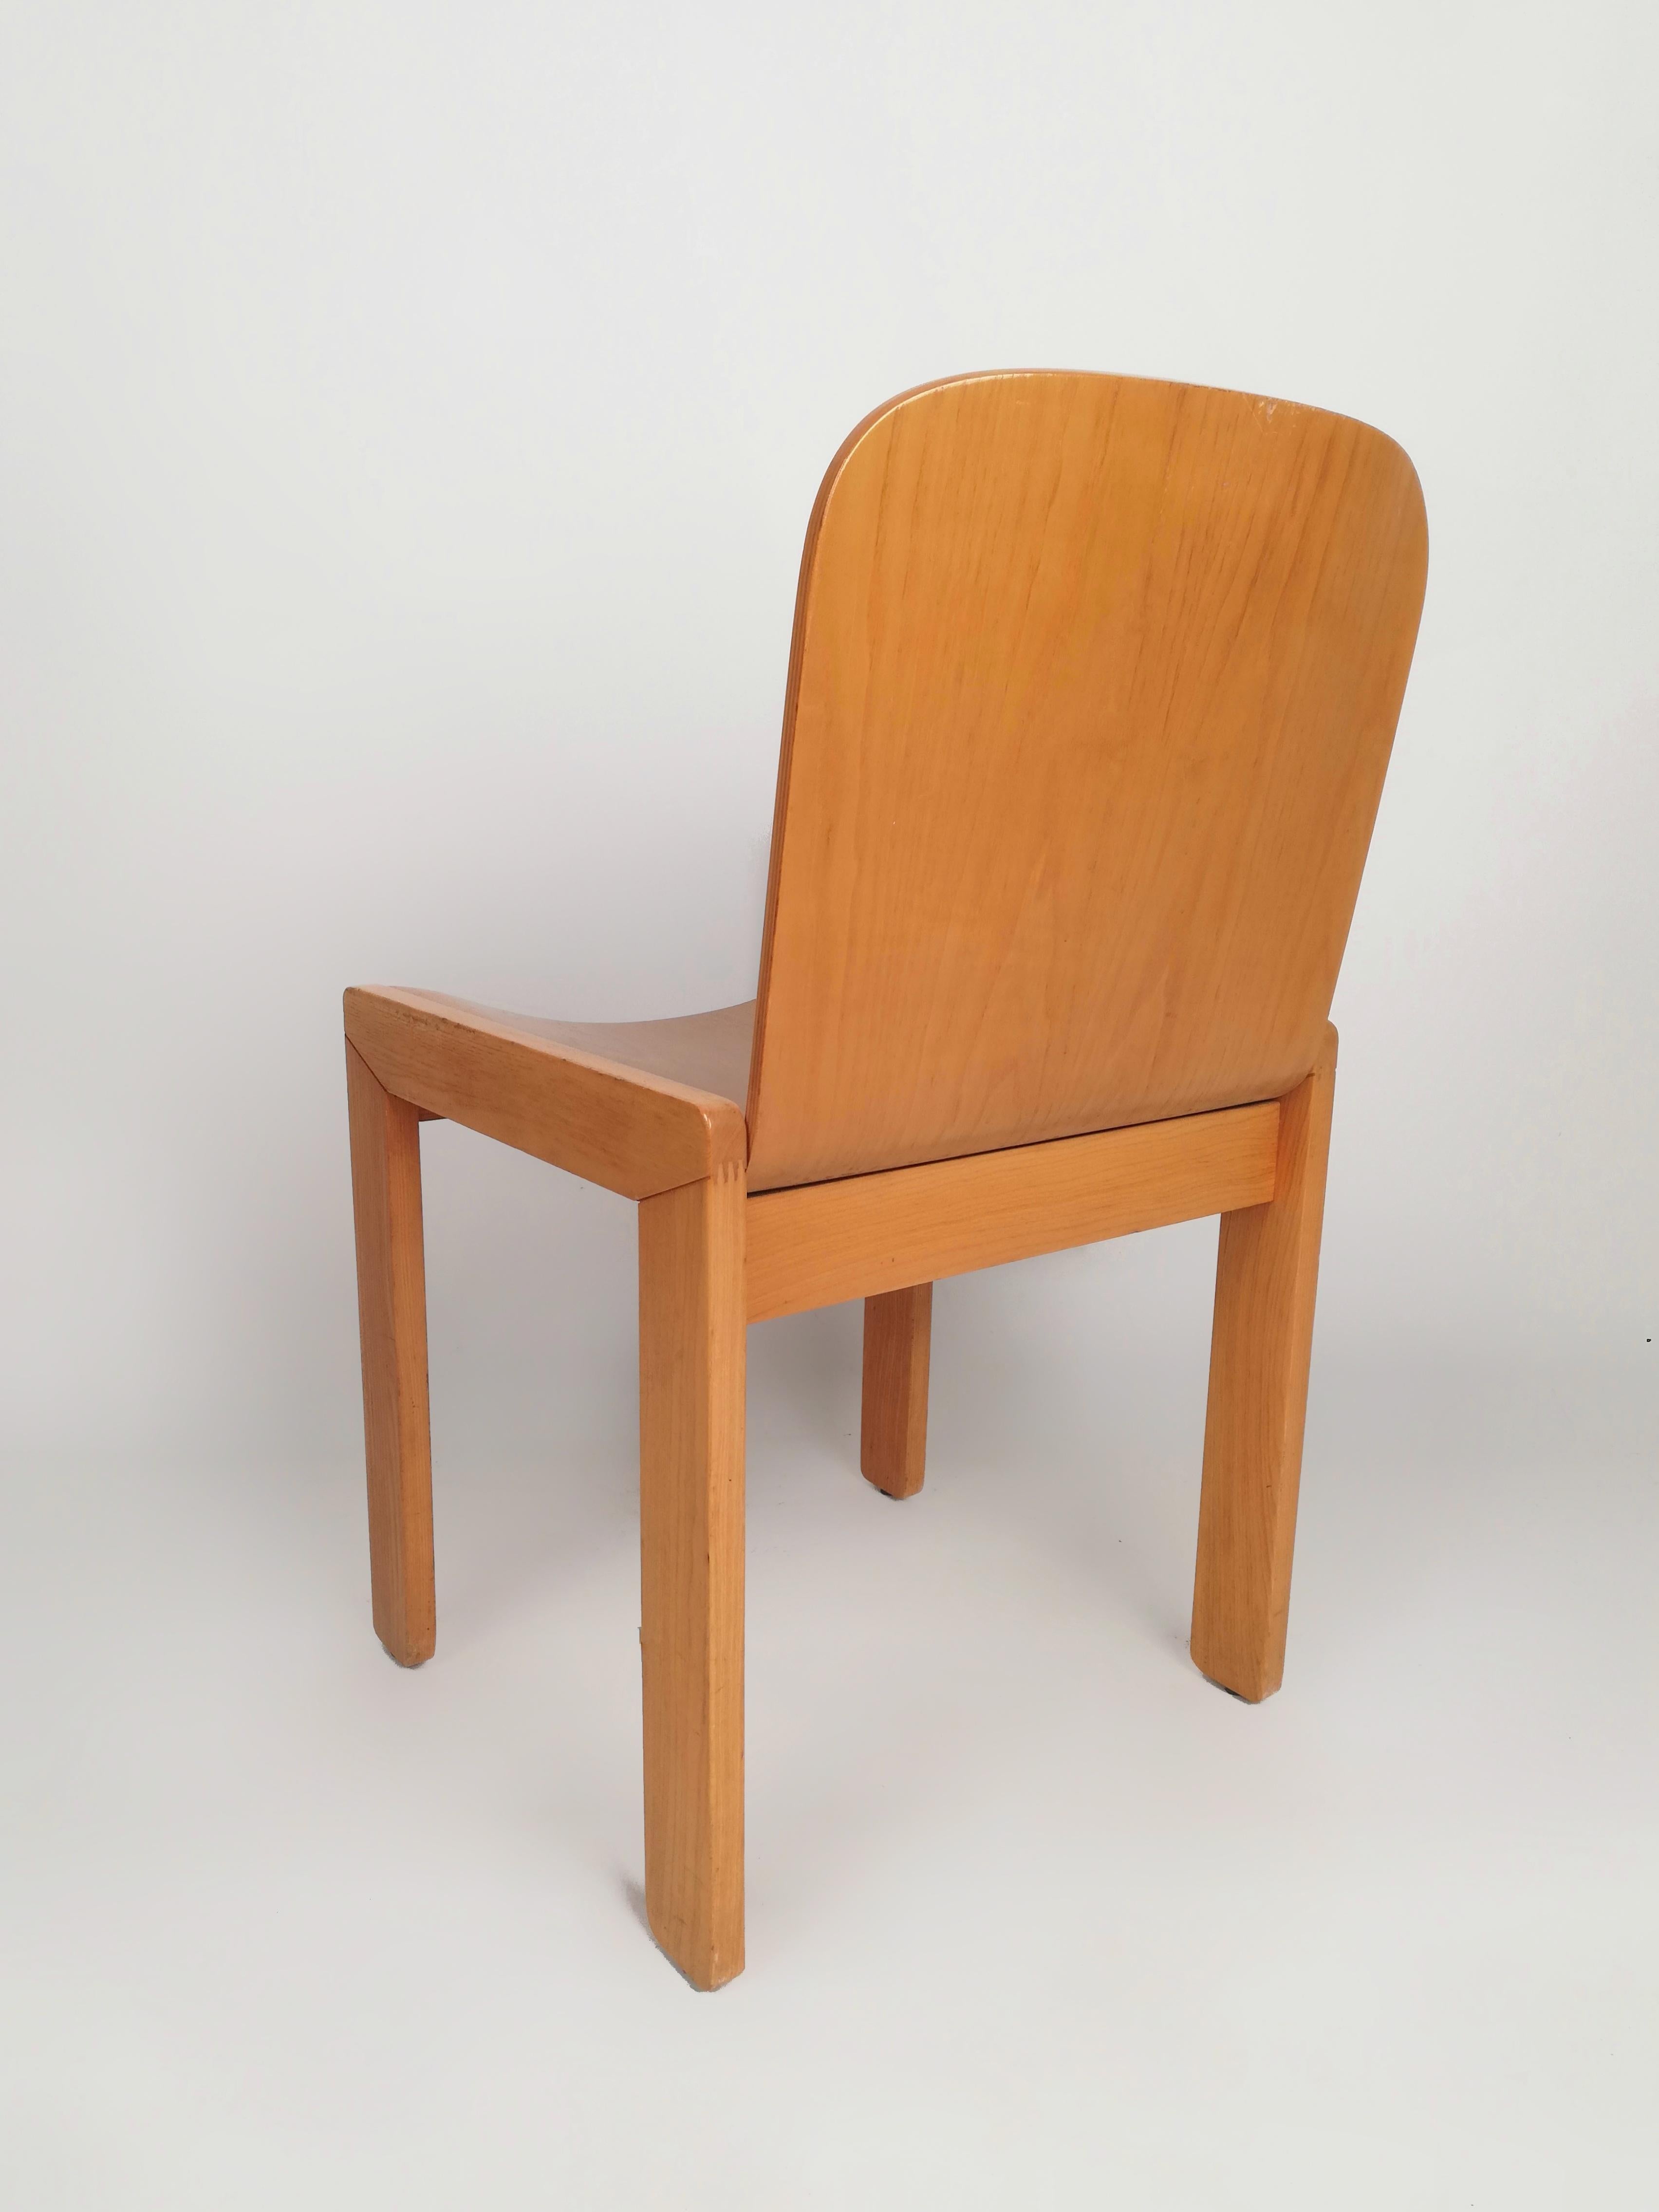 6 Curved Plywood Dining Chairs by Molteni in the style of Scarpa, Italy, 1970s For Sale 4